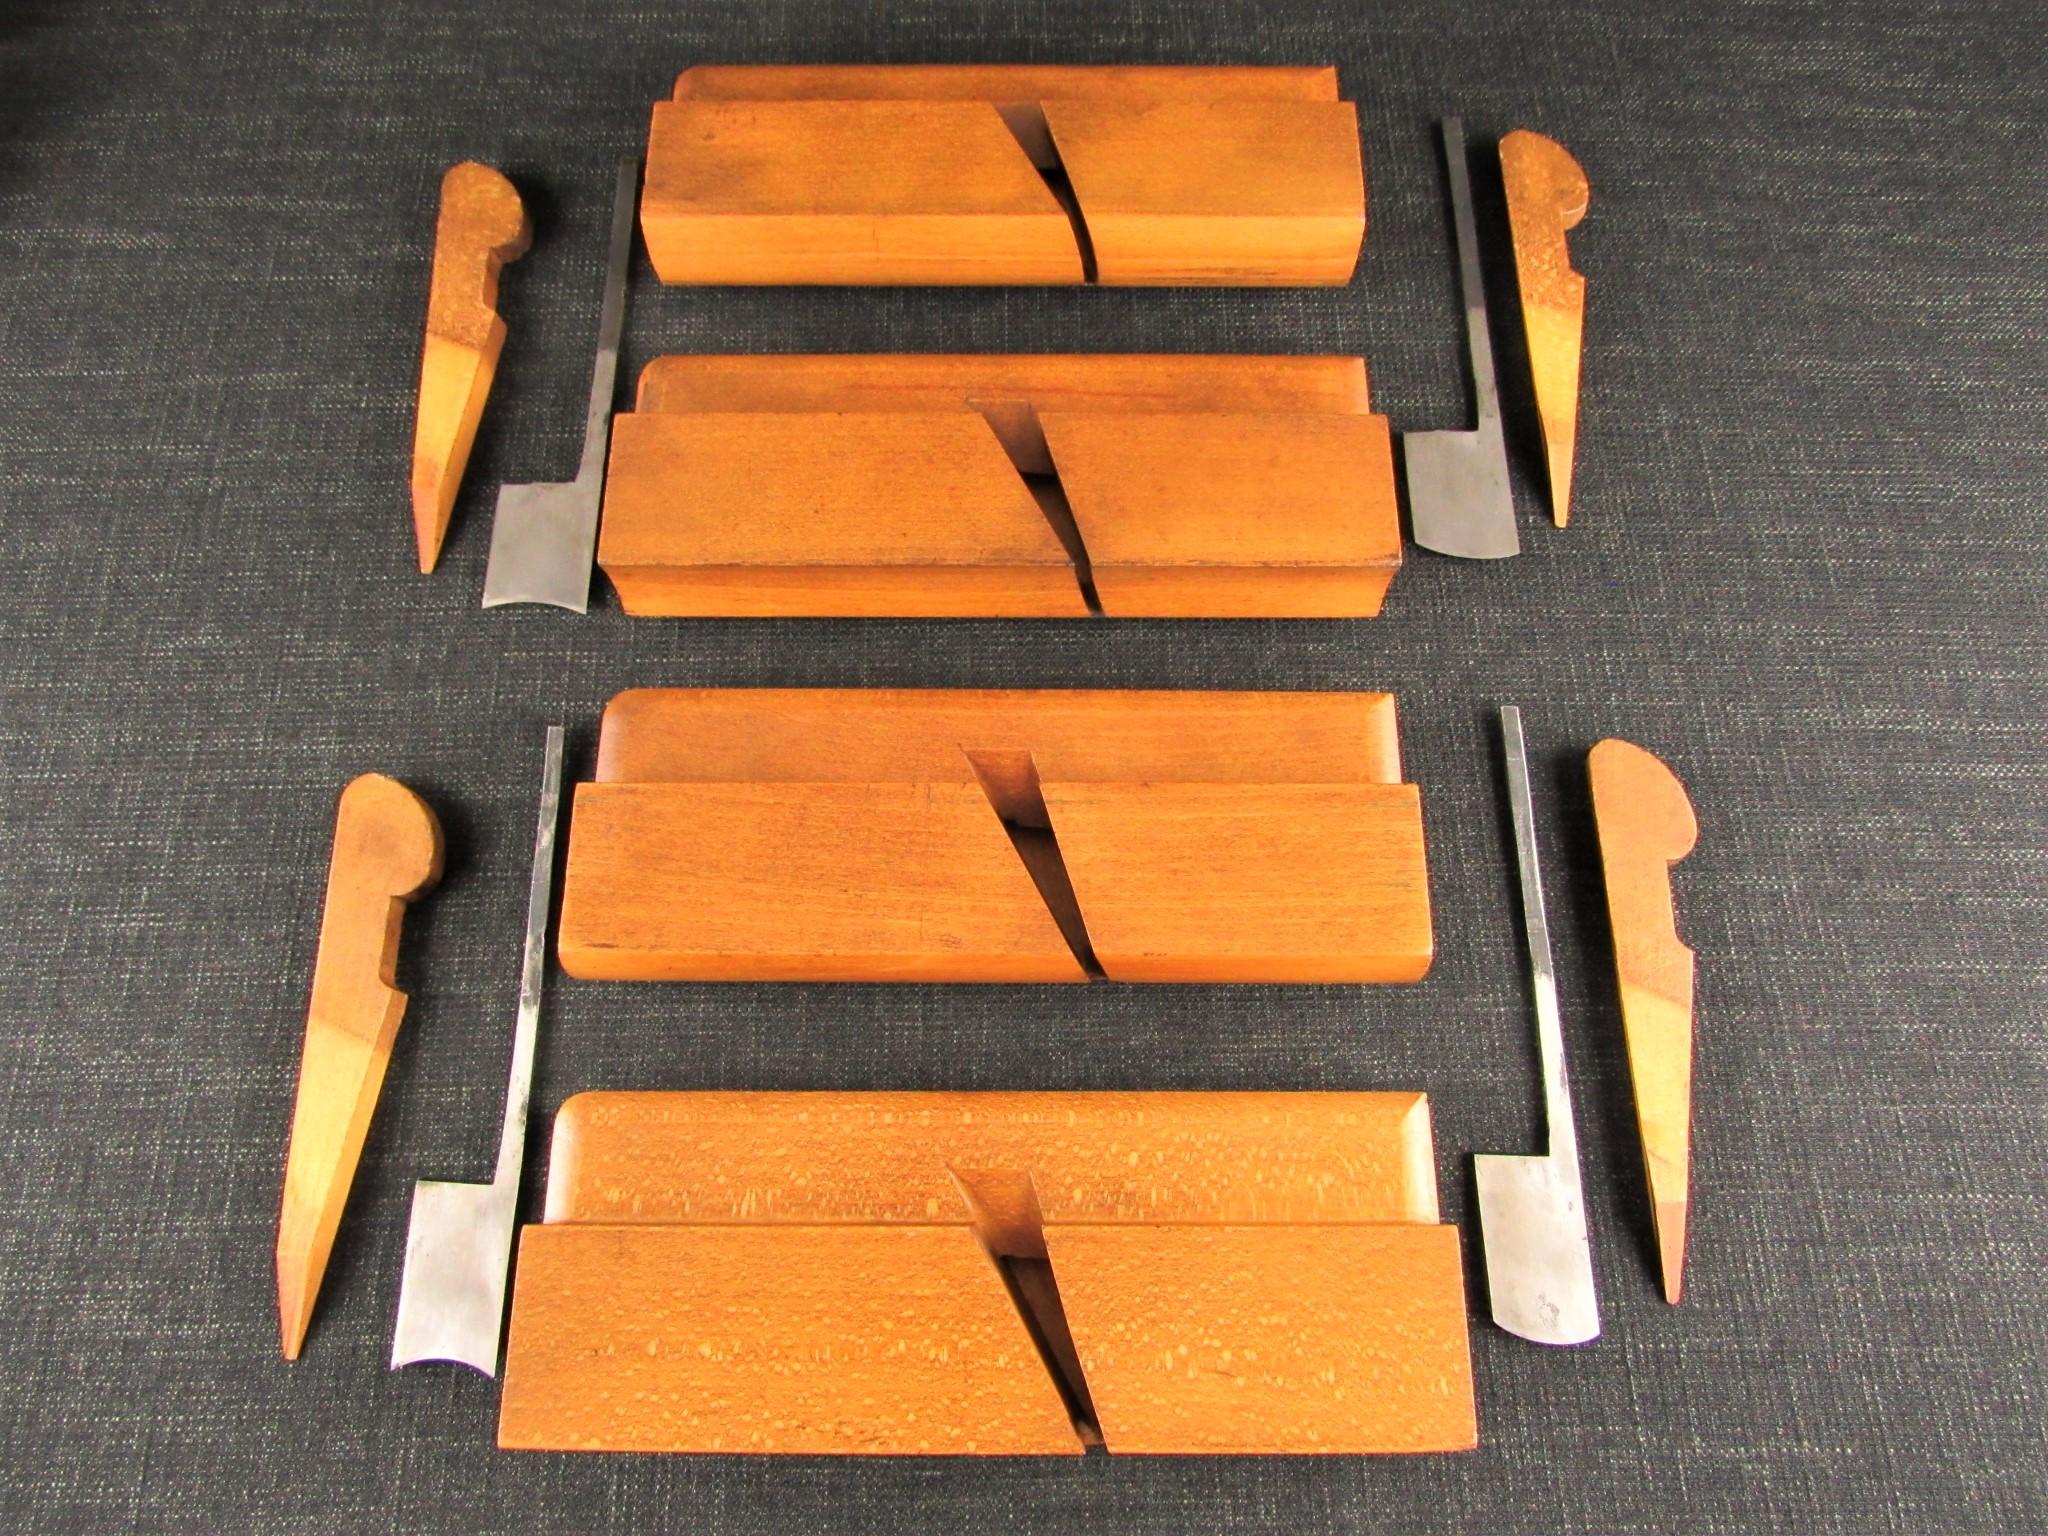 Cabinet Pitch Hollow & Round Moulding Planes by TURNER - Sheard Binnington & Co